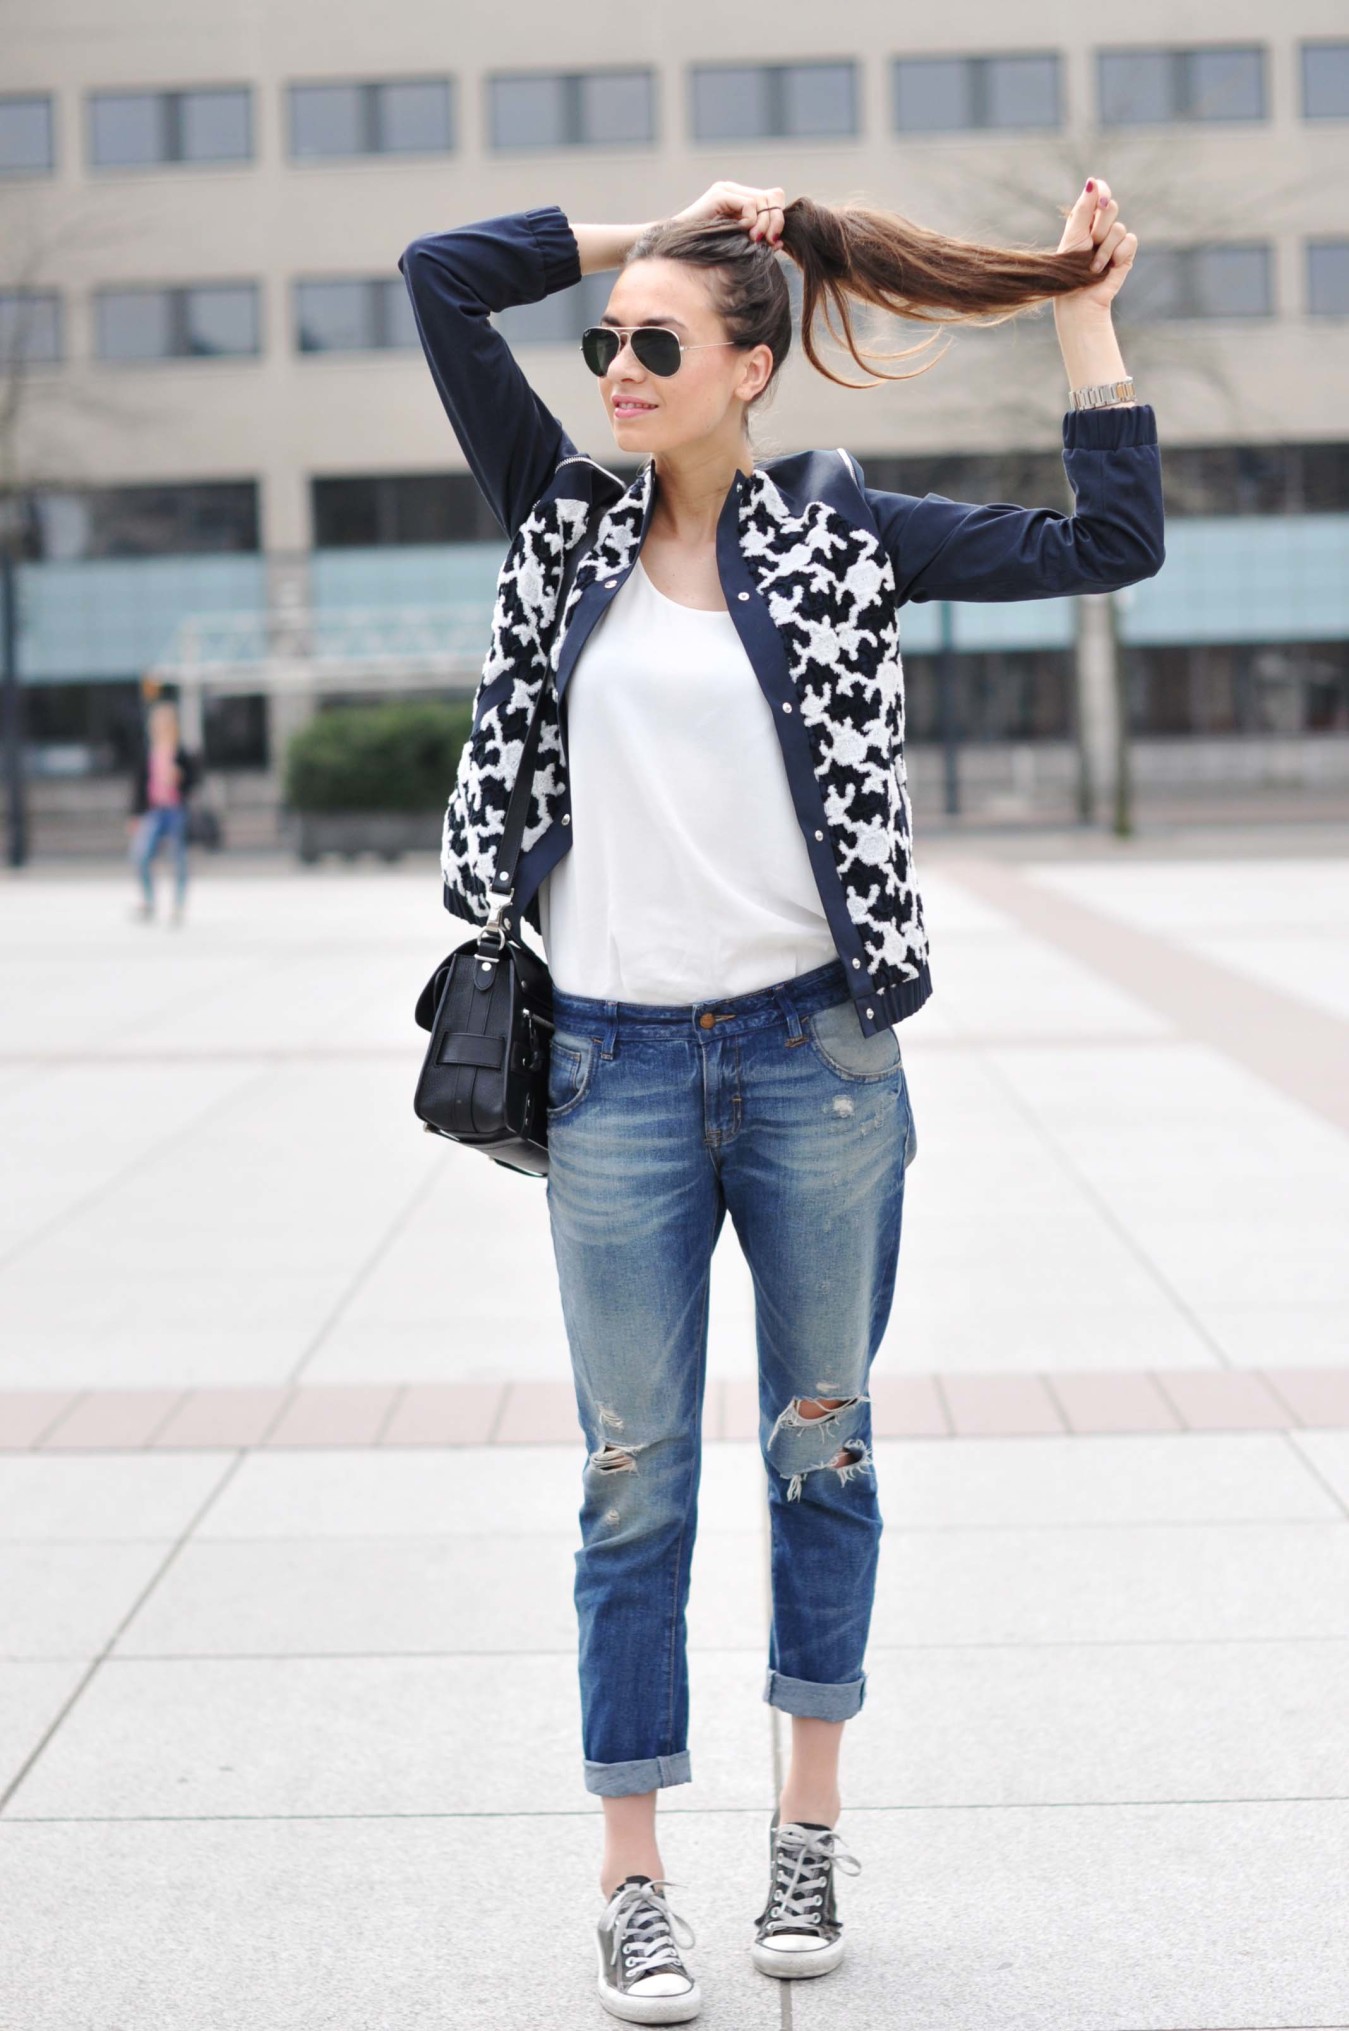 Phenomenal Jeans Outfit Ideas with Sneakers - Ohh My My